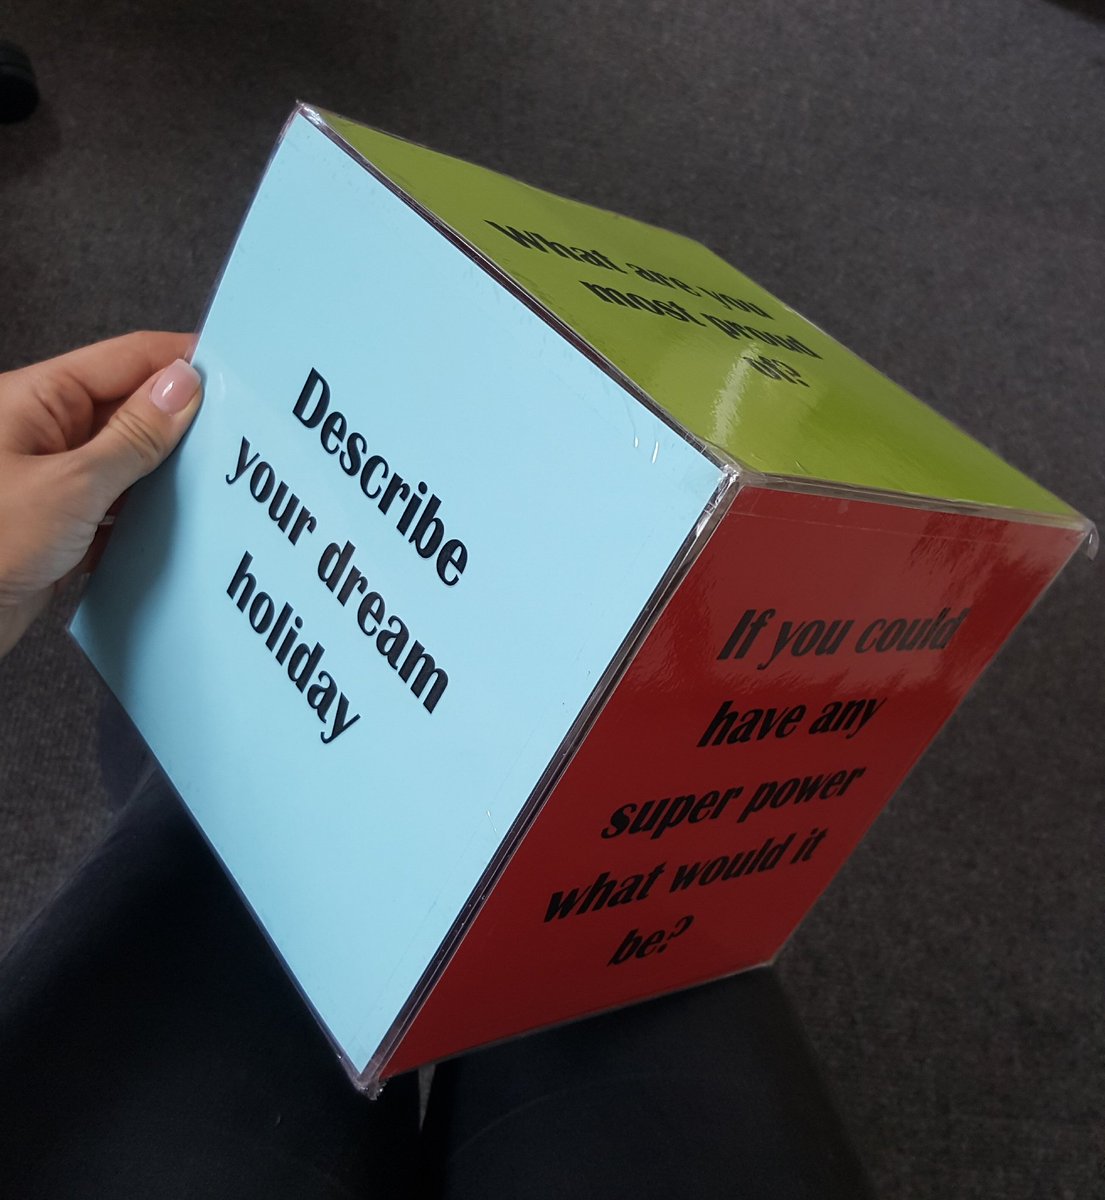 Just made a Question Cube for #OccupationalTherapy #safewards groups. Can't wait to use it with patients as a way to #knoweachother better on #mulberryward #gmmhot